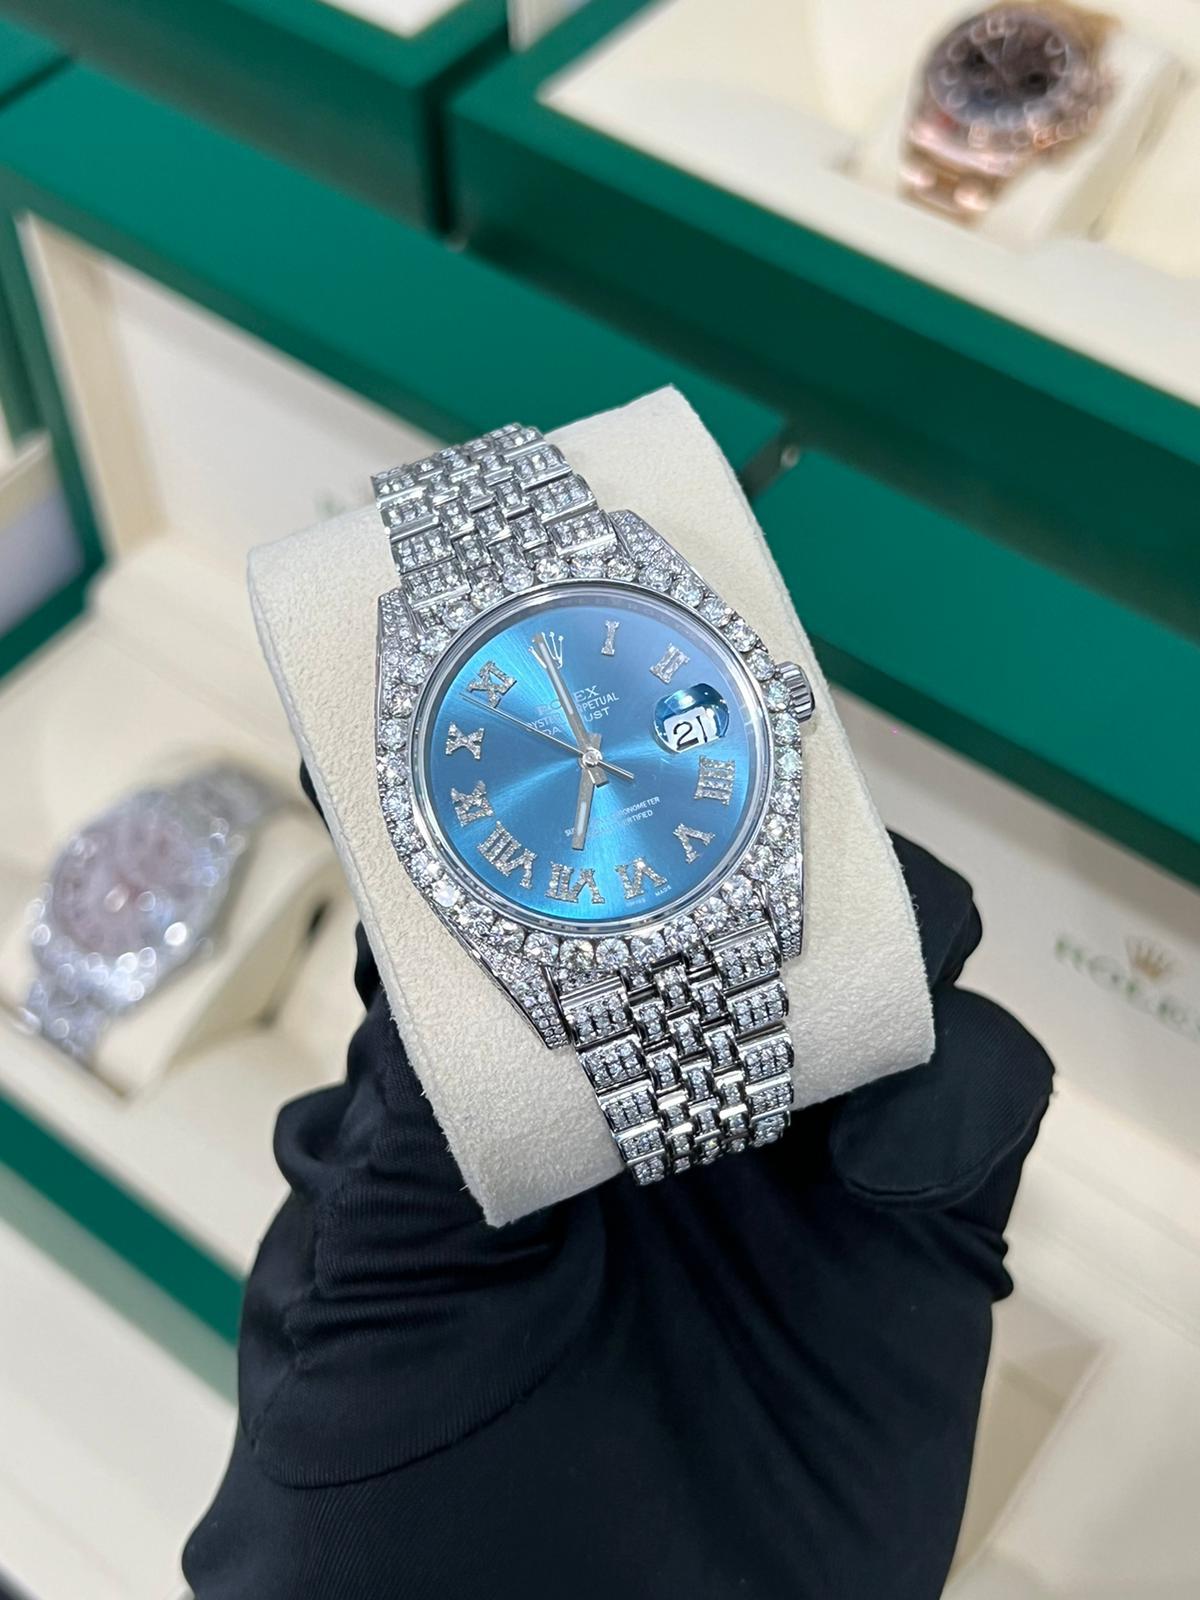 A Beautifully Customized Pave Diamond Dial Datejust 41mm Watch with Roman Numerals!!! This Watch Has Been Set Wonderfully and Is Fully Iced Out! the Diamonds Are Top Quality and the Watch Comes with Box and Papers.
Model number: 126300
Movement: